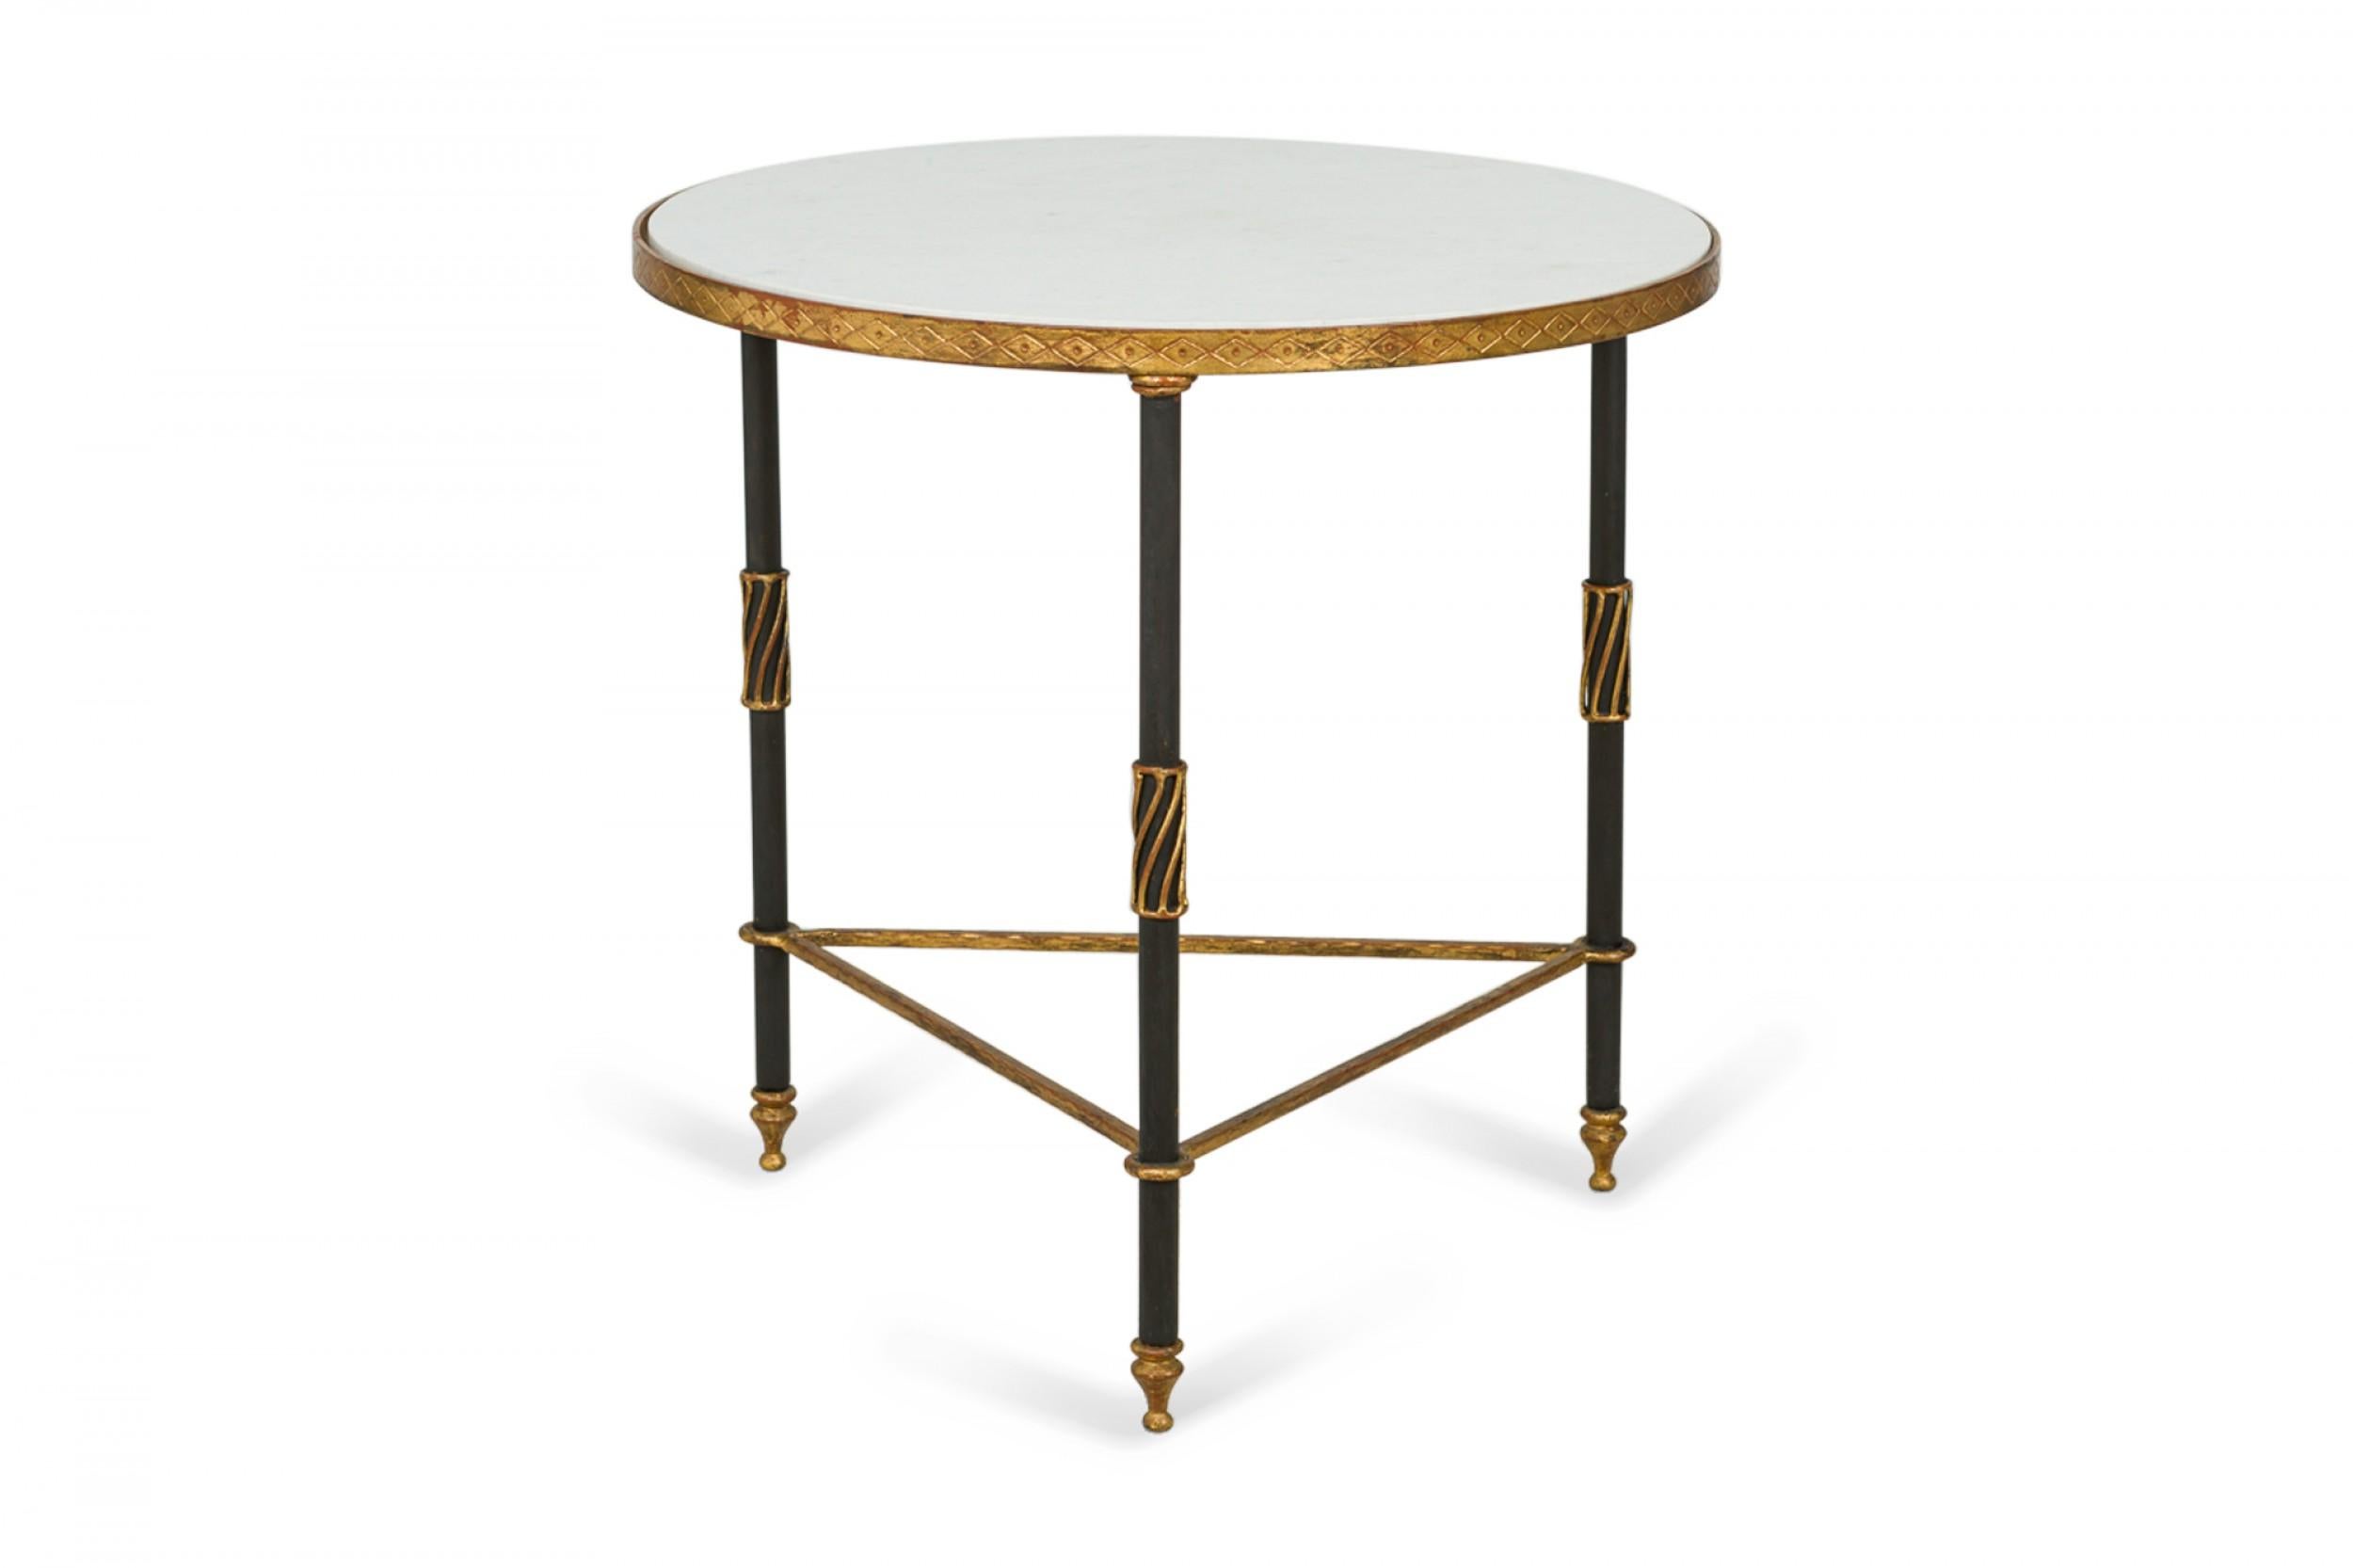 Mid-century circular end / side table with a white marble top supported by a 3-legged black iron frame with gilt iron trim and details. (PALLADIO)(Similar table: DUF0355B)